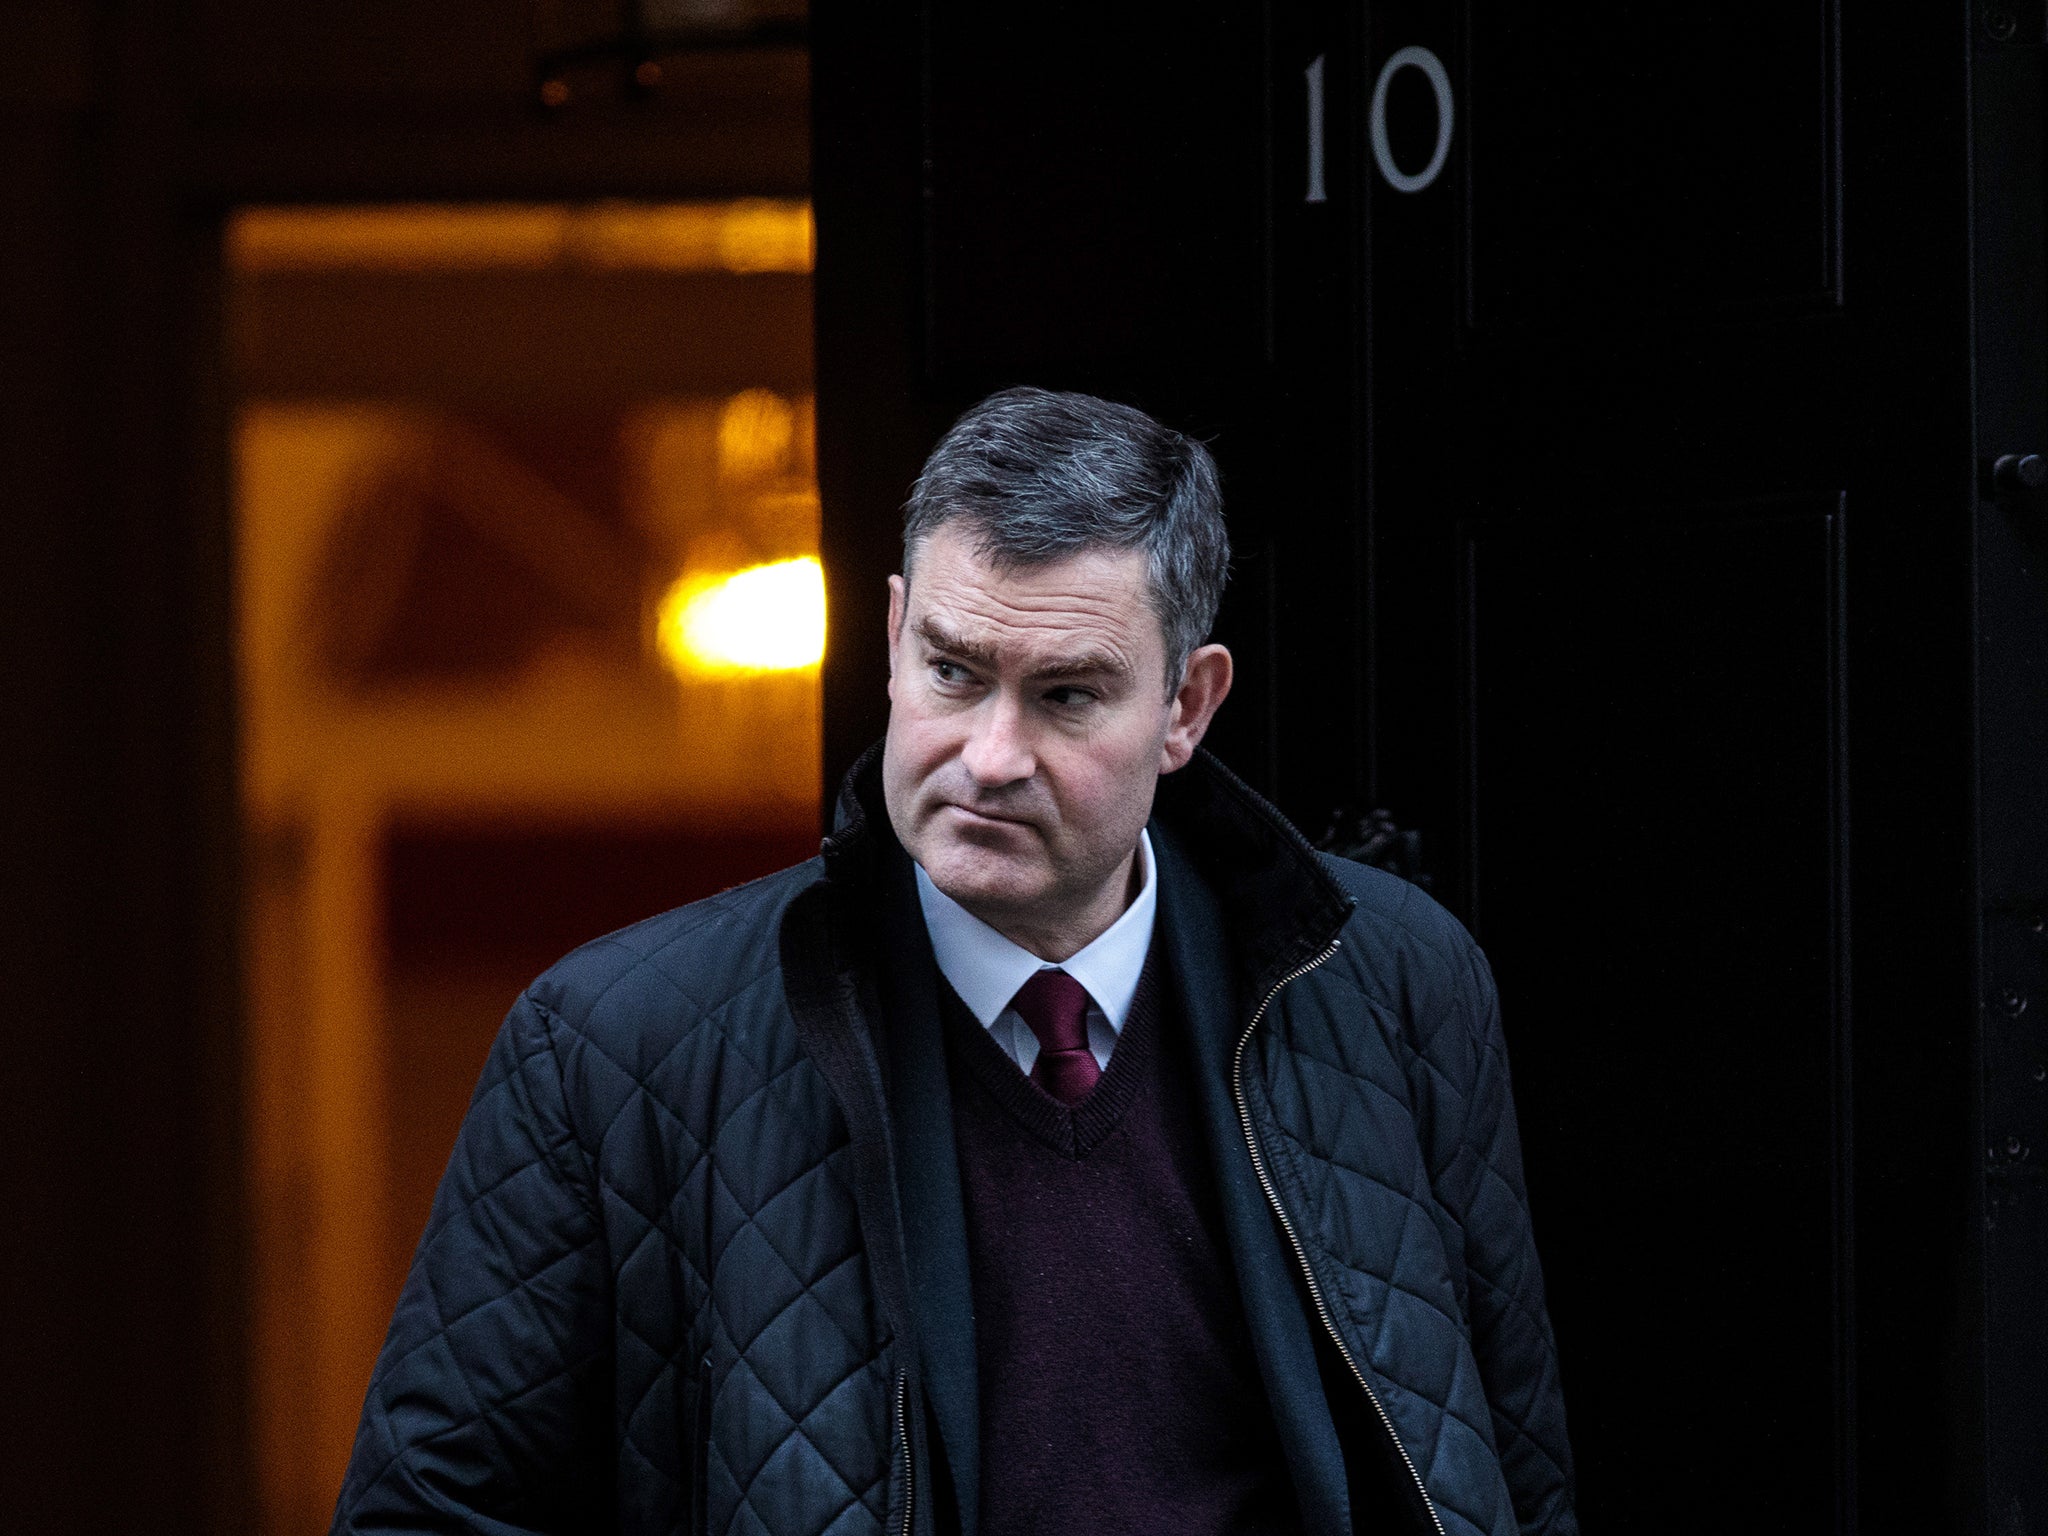 Replace prison terms with robust community orders, Gauke says